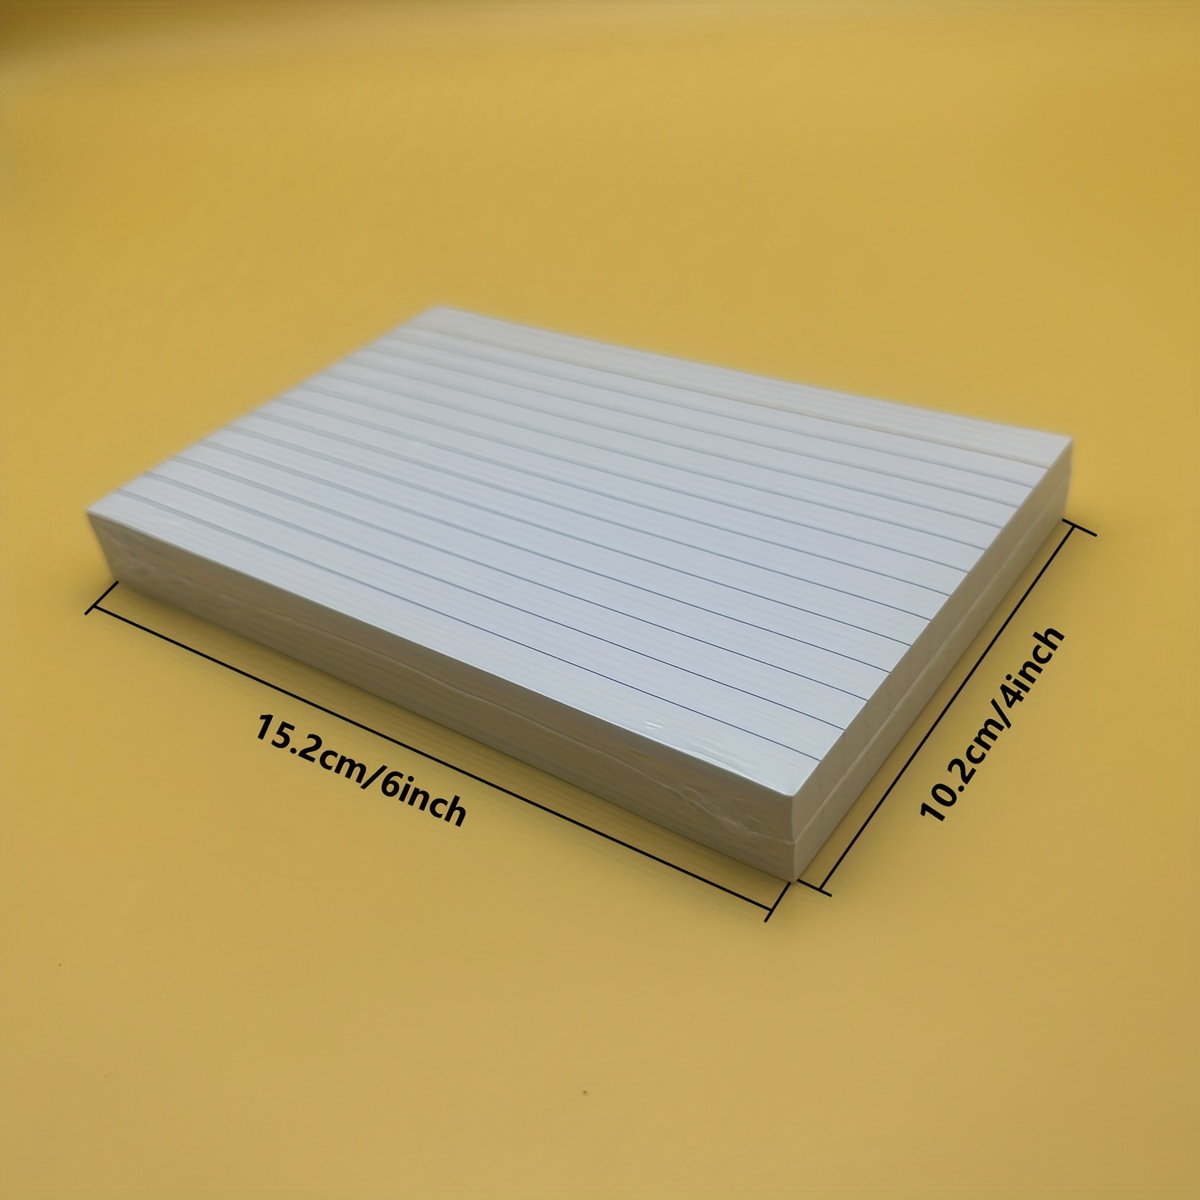 IMPRINT'S Ruled Flash Cards/Index Cards,White Card Stock,4 x 6 Inches,  300 Cards in This Pack